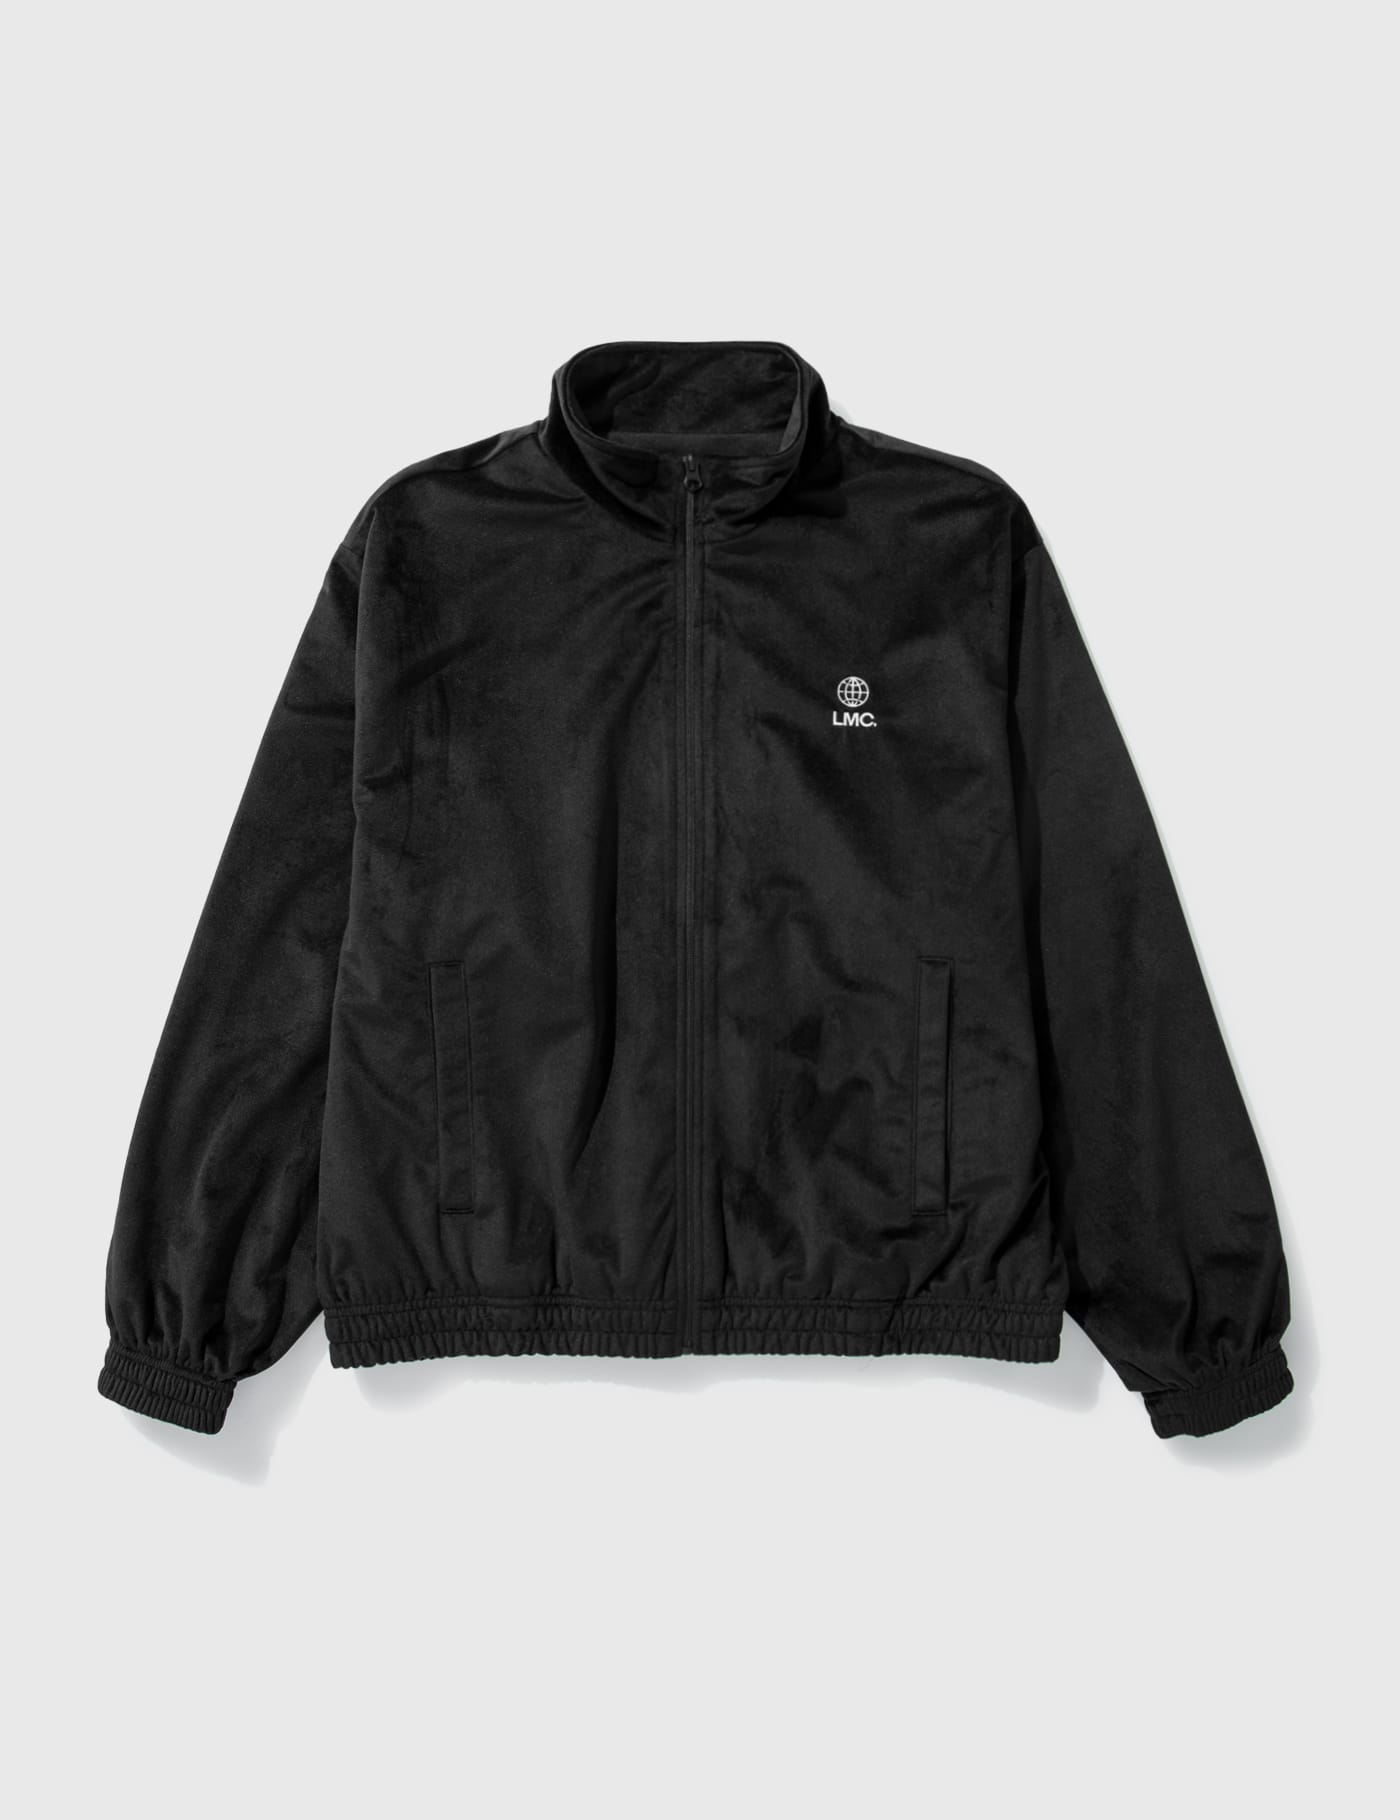 LMC - OG Globe Velour Track Jacket | HBX - Globally Curated Fashion and  Lifestyle by Hypebeast